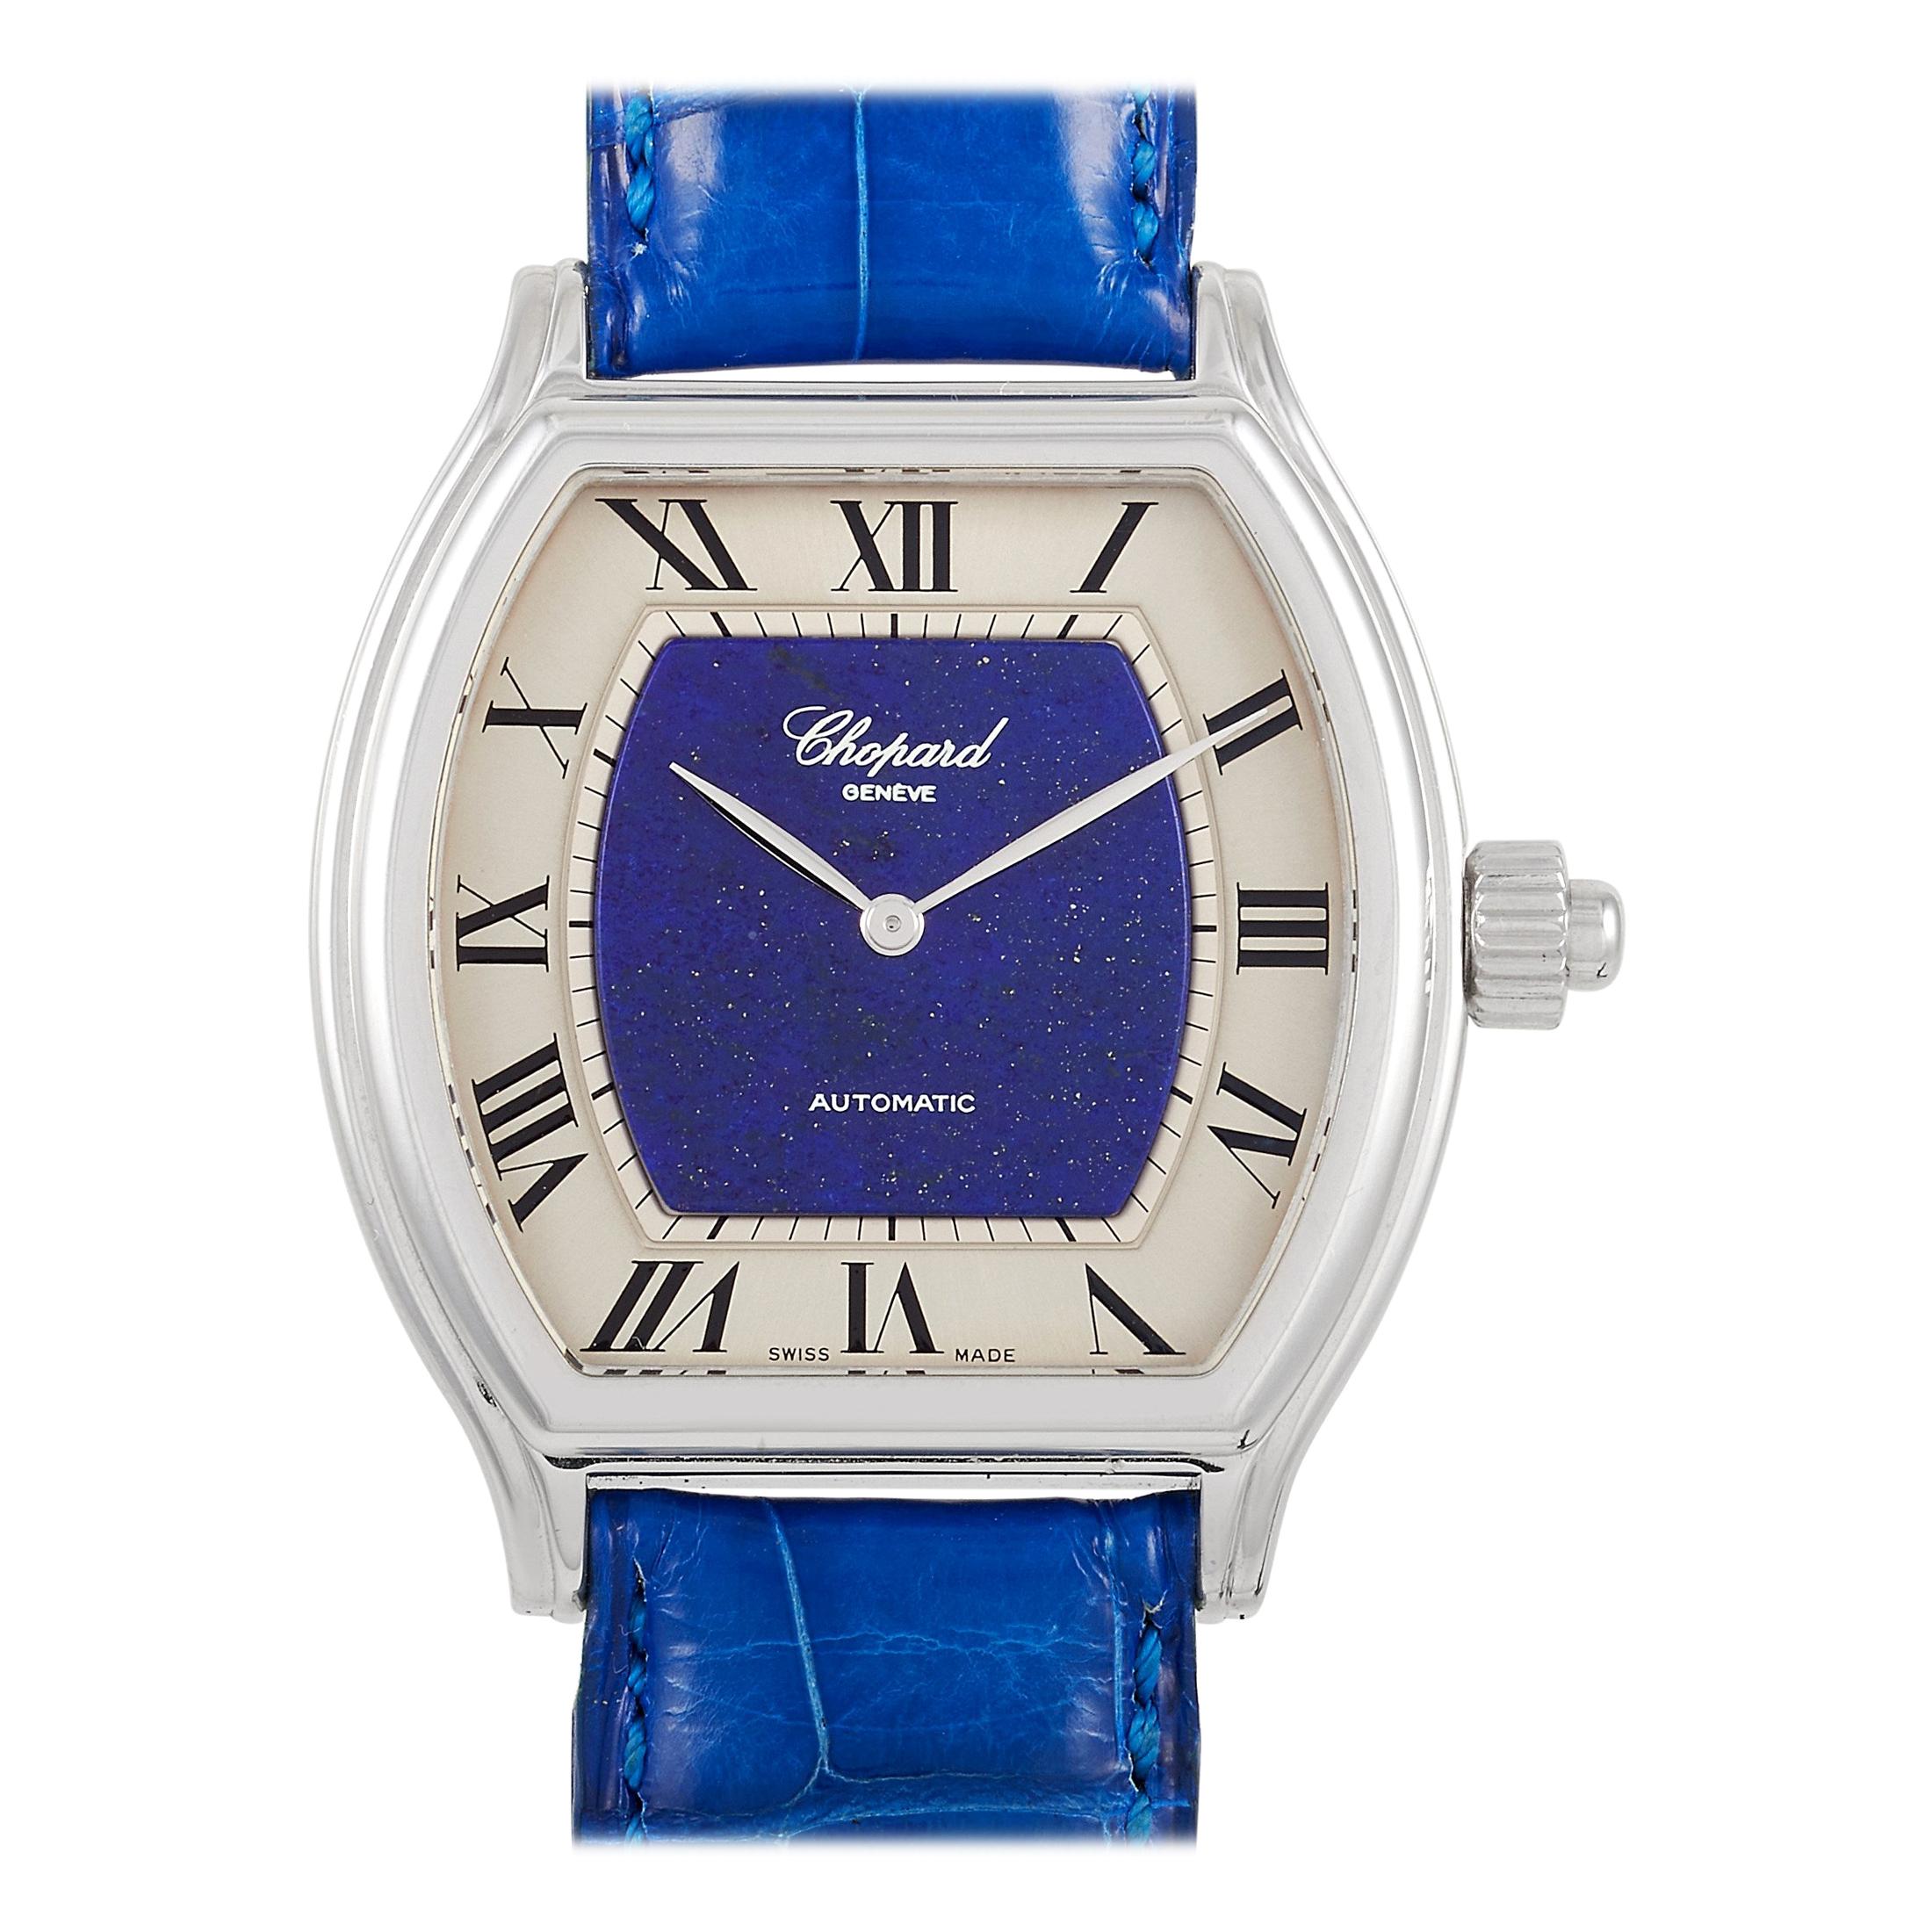 Chopard Tonneau Concealed Erotic Automatic White Gold Watch 16/2254/478